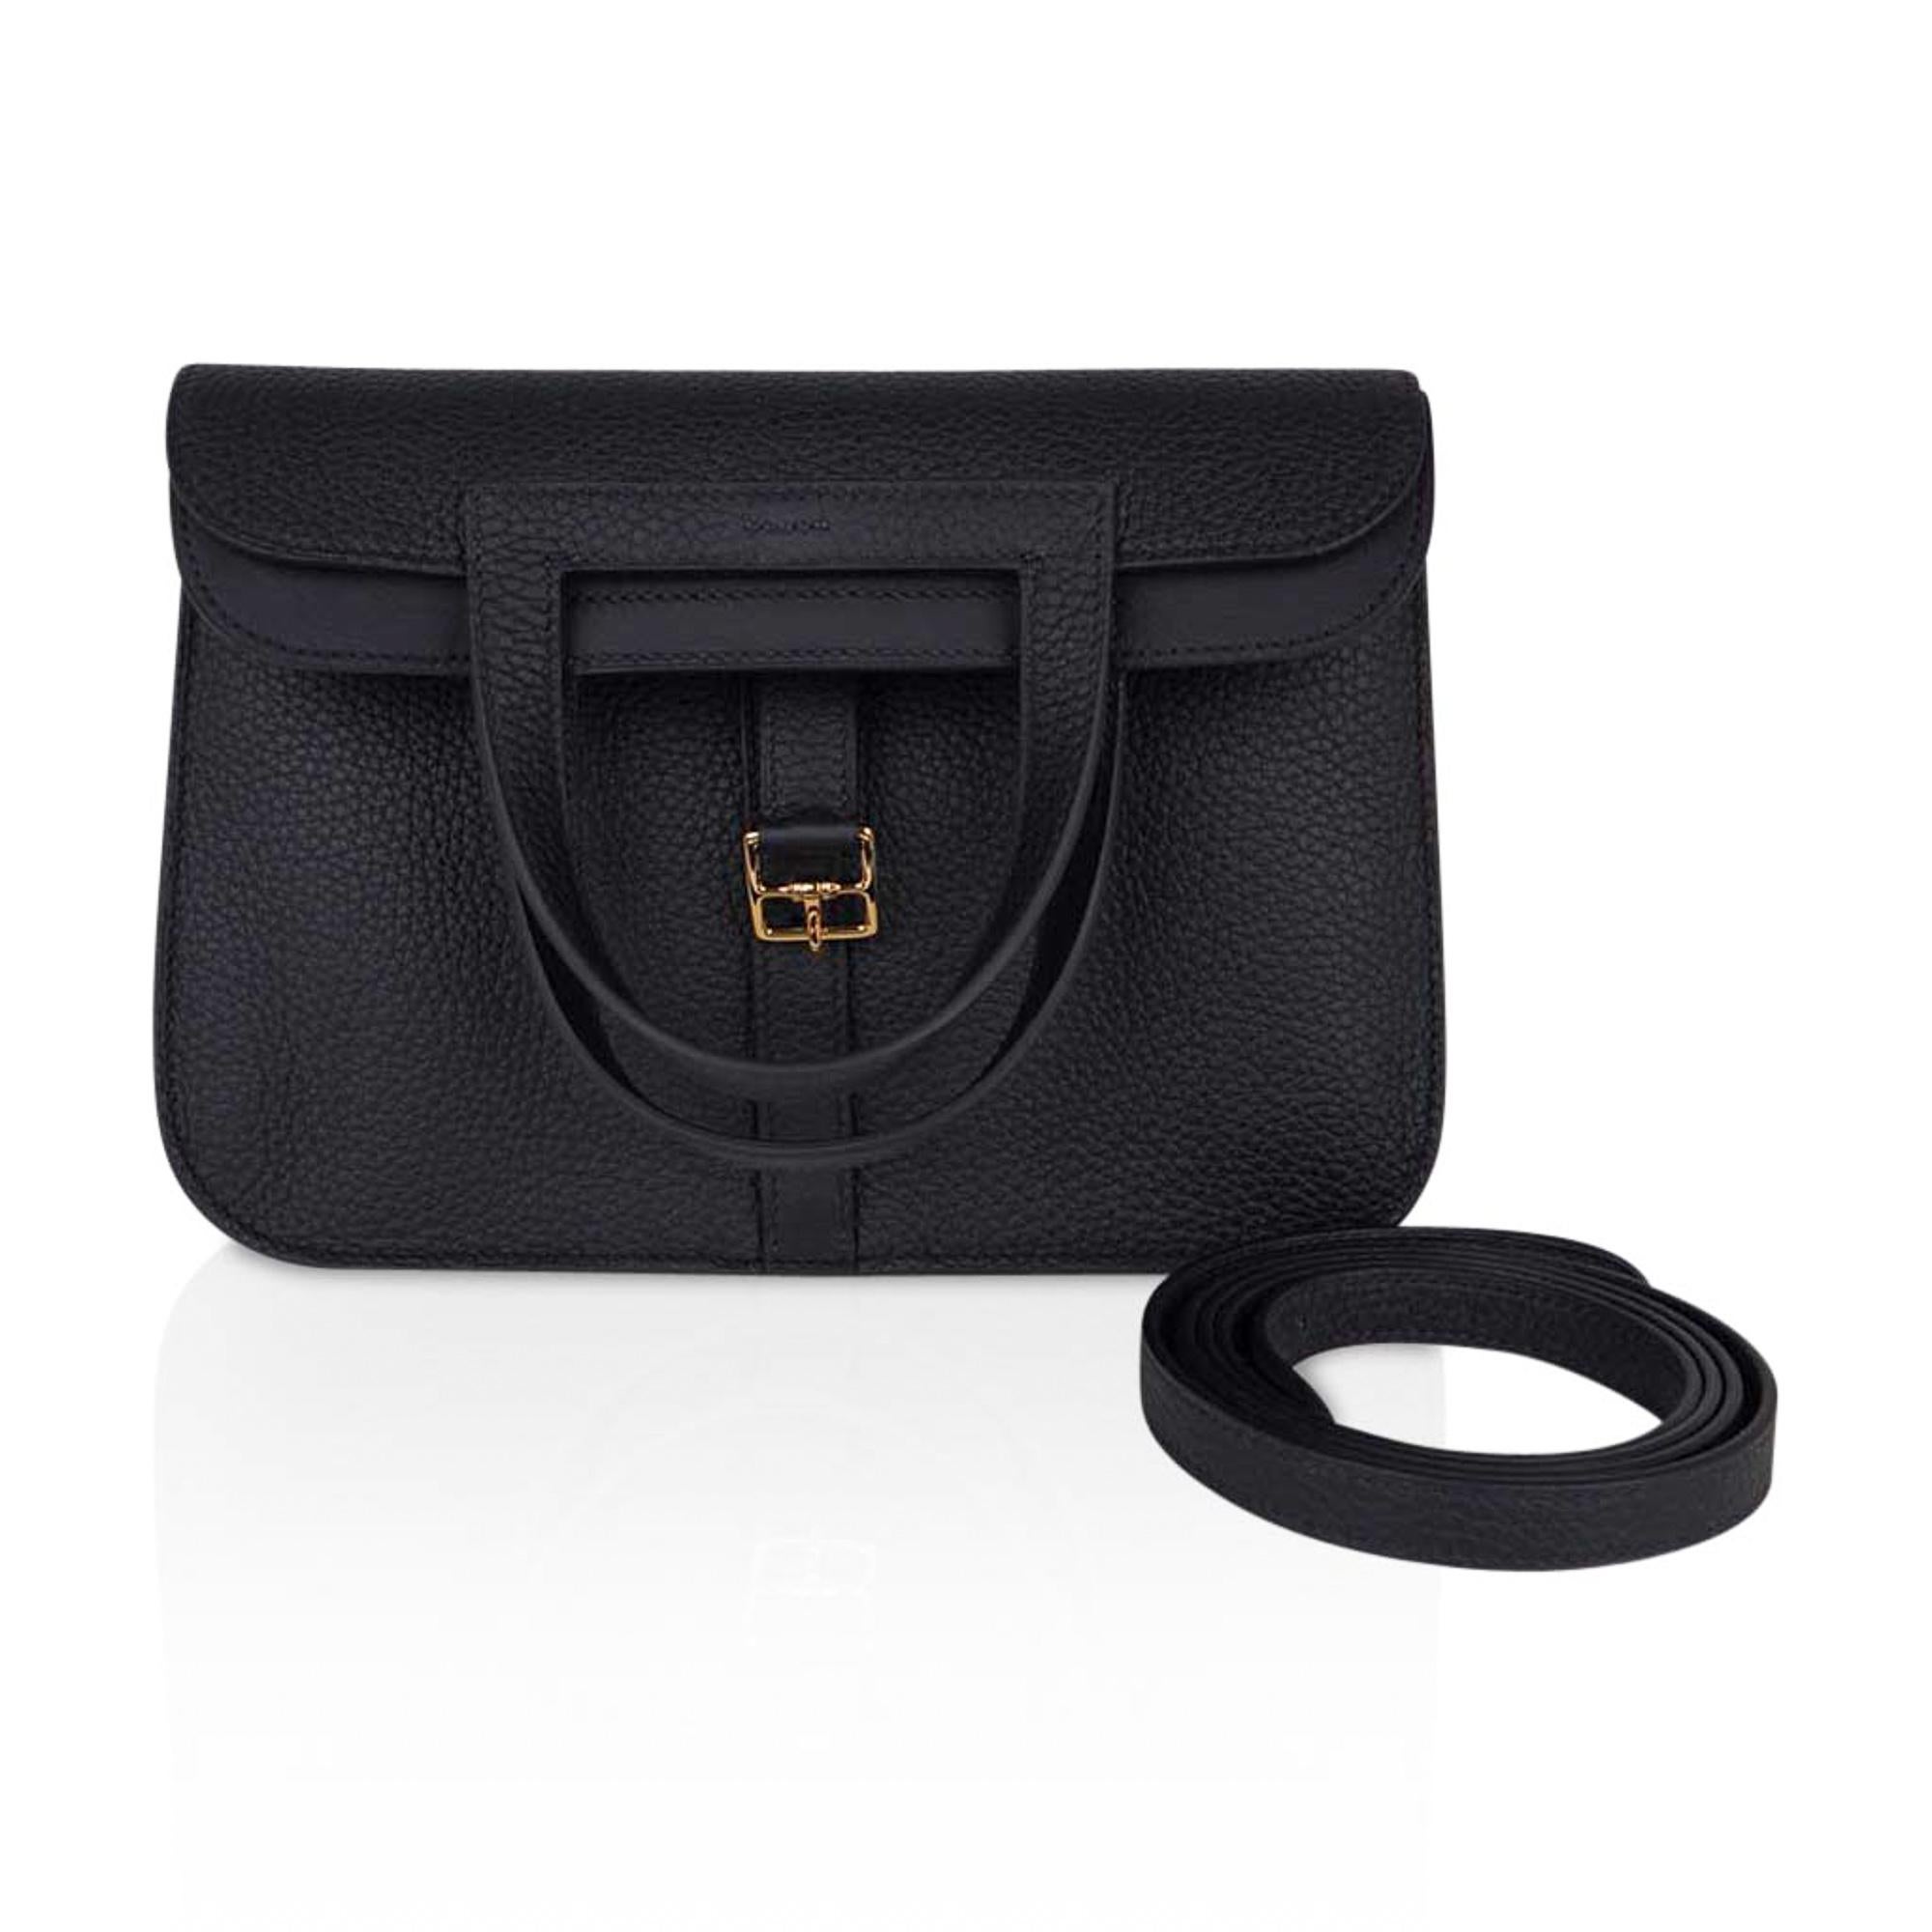 Mightychic offers a guaranteed authentic Hermes Halzan 25 bag featured in Black  with lush with Gold hardware.
Plush Clemence leather.
Versatile three-way bag.
The Hermes Halzan bag is a fresh take on the messenger with the crossbody strap.
Fold